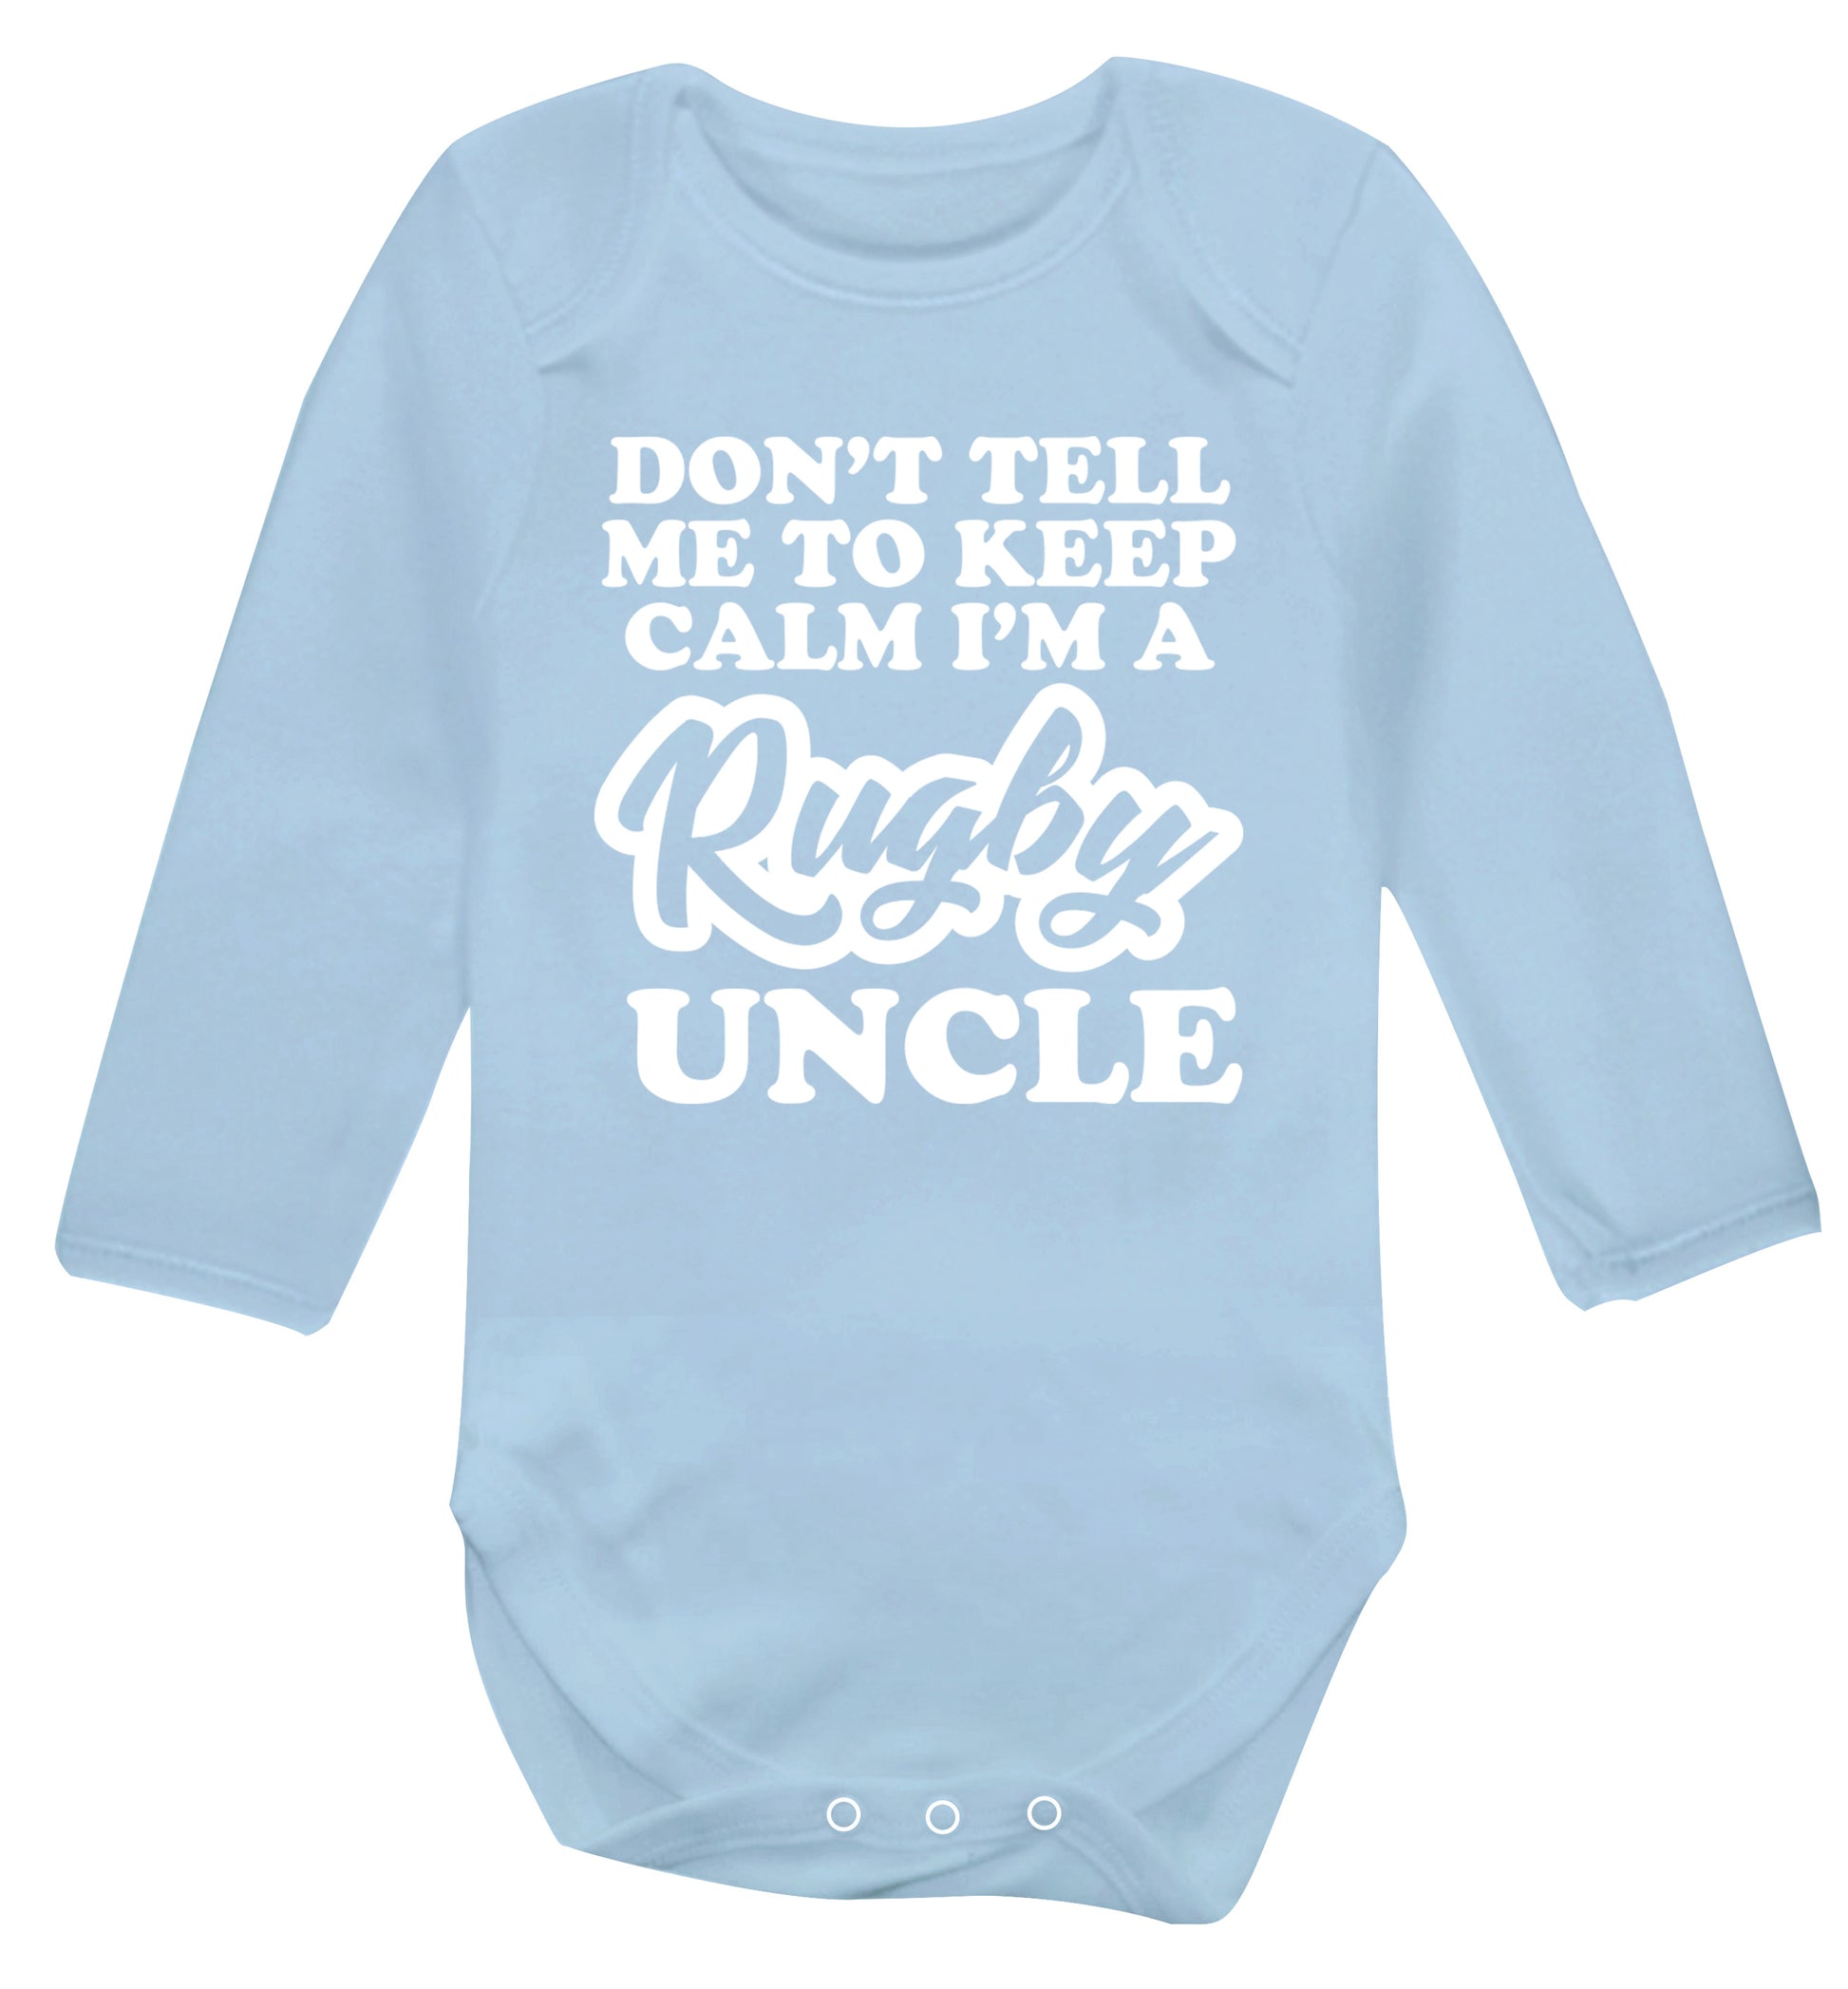 Don't tell me to keep calm I'm a rugby uncle Baby Vest long sleeved pale blue 6-12 months